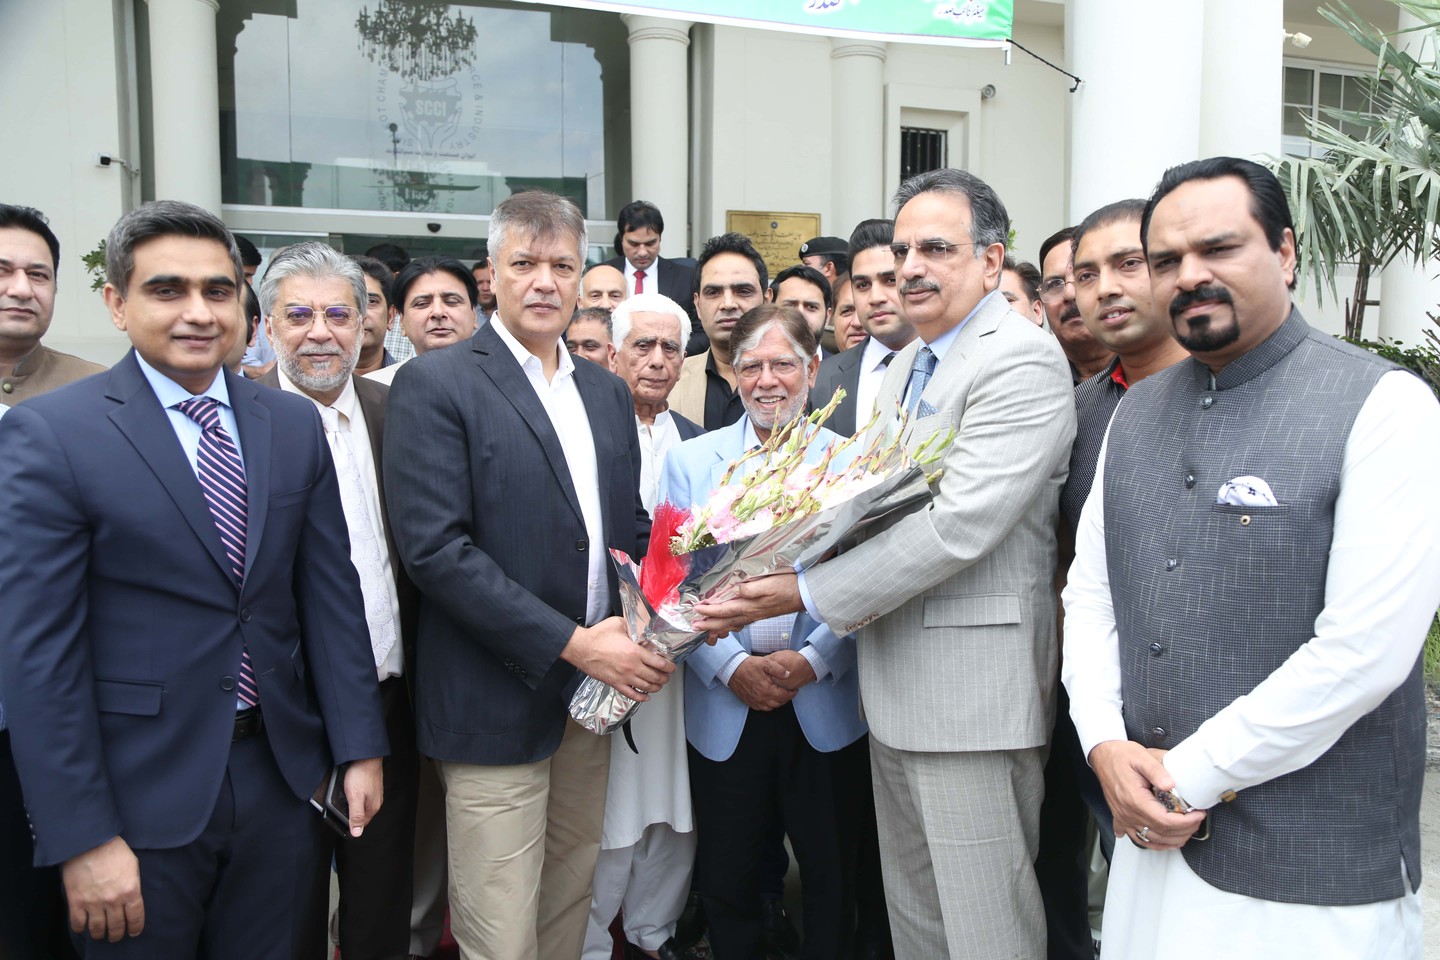 On May 30, 2023, Mr. S.M. Tanveer, Provincial Minister for Industries, Commerce, Energy, Investment & Skill Development (ISI&SD), visited the Sialkot Chamber of Commerce & Industry (SCCI). Mr. Abdul Ghafoor Malik, President of SCCI, welcomed the Minister and appreciated the formation of the Punjab Chambers of Commerce Coordination Committee to address business community issues. Submissions made to the Minister included:  Request to restore canceled plots of Exporters in EPZ Sialkot and extend the construction timeline by 2 years. Abolition of late construction charges for Sialkot exporters was also sought. Completion of pending notification for the EPZ Board of Management (BOM) was requested to initiate development work.  Importance of renovating and operationalizing the Sports Goods Materials Testing Lab in EPZ Sialkot was emphasized. PKR 900 million PC-II from PSIC was submitted for approval, and release of funds for the project was requested.  Pending Section-V of Sialkot Industrial Zone due to non-formation of BOM of Punjab Industrial Estate Development Management Company (PIEDMC). Minister urged to expedite the process for further action.  Additional property tax on properties along highways is a financial burden on Sialkot exporters. Exclusion of export industrial units from property tax, as per Section 10 of Punjab Finance Act 2019, was requested from Punjab Revenue Authority (PRA).  Sialkot industry is 100% export-oriented, with only 2% service rate from Freight Forwarders, Clearing Agents, Auditors, and Tax Consultants. These service sectors are already registered with PRA and cause no loss to the department. Exclusion of export-oriented units from withholding sales tax on services sector was requested.  Request for PKR 1000 million for completion of Sialkot-Pasrur Road, crucial for industrial units located on it.  Minister Tanveer assured that all issues would be addressed on a priority basis to facilitate the Sialkot Business Community. Notification for S.I.E. II & S.I.E III Board of Management (BOM) was also issued as per his instructions.